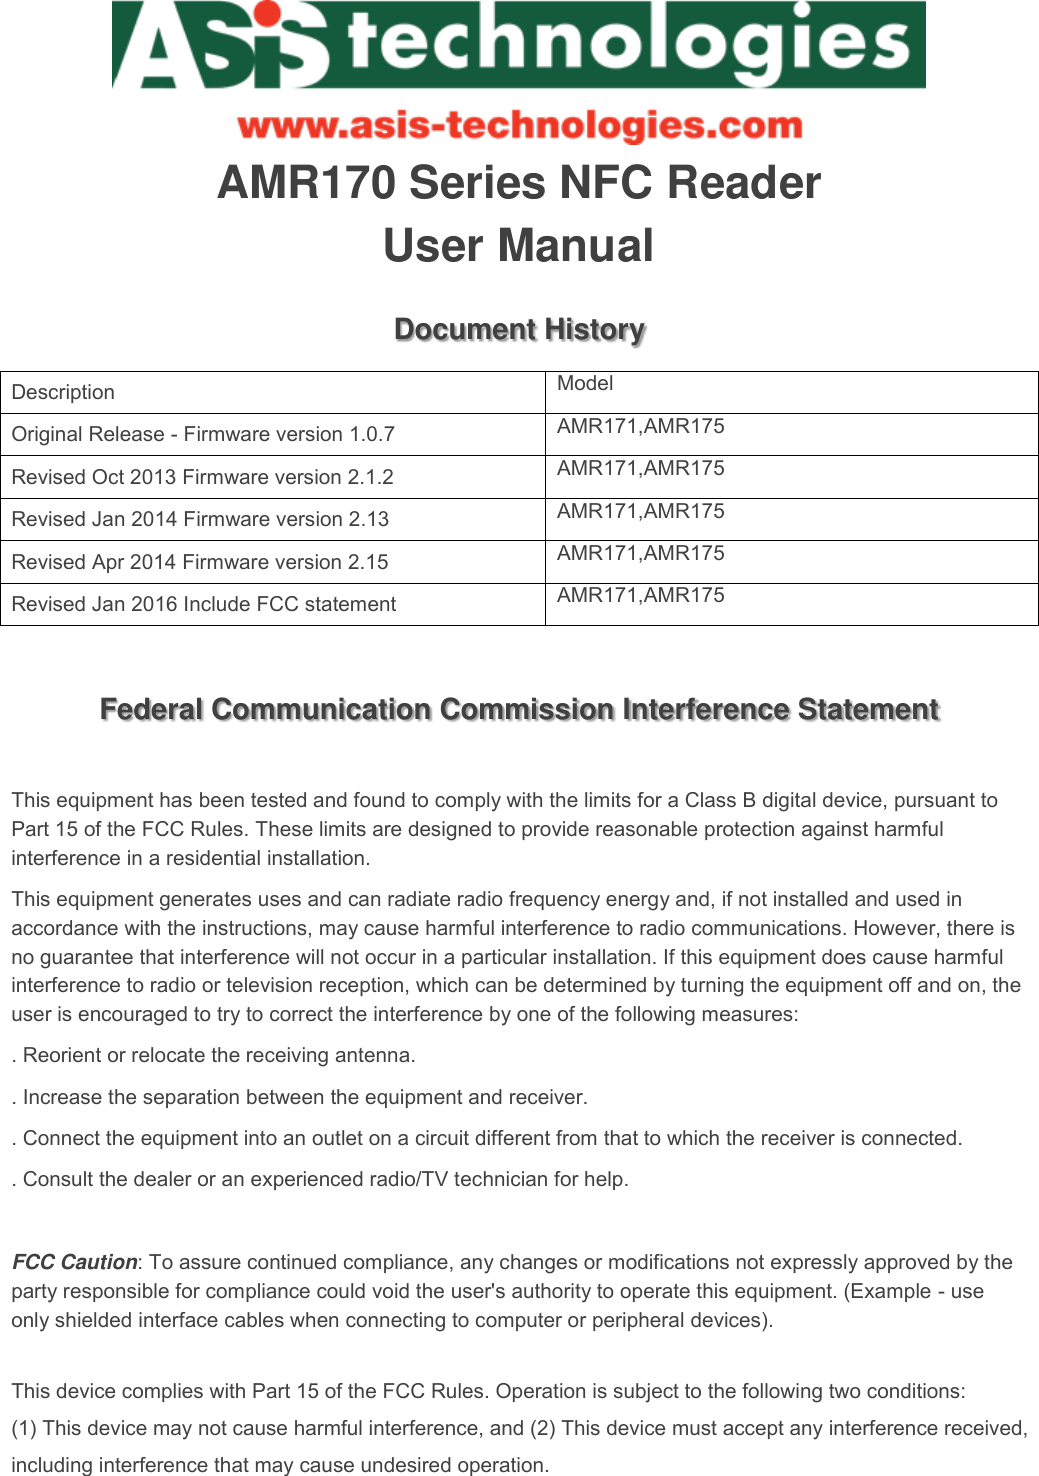    AMR170 Series NFC Reader User Manual Document History Description Model Original Release - Firmware version 1.0.7 AMR171,AMR175 Revised Oct 2013 Firmware version 2.1.2 AMR171,AMR175 Revised Jan 2014 Firmware version 2.13 AMR171,AMR175 Revised Apr 2014 Firmware version 2.15 AMR171,AMR175 Revised Jan 2016 Include FCC statement AMR171,AMR175  Federal Communication Commission Interference Statement  This equipment has been tested and found to comply with the limits for a Class B digital device, pursuant to Part 15 of the FCC Rules. These limits are designed to provide reasonable protection against harmful interference in a residential installation. This equipment generates uses and can radiate radio frequency energy and, if not installed and used in accordance with the instructions, may cause harmful interference to radio communications. However, there is no guarantee that interference will not occur in a particular installation. If this equipment does cause harmful interference to radio or television reception, which can be determined by turning the equipment off and on, the user is encouraged to try to correct the interference by one of the following measures: . Reorient or relocate the receiving antenna. . Increase the separation between the equipment and receiver. . Connect the equipment into an outlet on a circuit different from that to which the receiver is connected. . Consult the dealer or an experienced radio/TV technician for help.  FCC Caution: To assure continued compliance, any changes or modifications not expressly approved by the party responsible for compliance could void the user&apos;s authority to operate this equipment. (Example - use only shielded interface cables when connecting to computer or peripheral devices).  This device complies with Part 15 of the FCC Rules. Operation is subject to the following two conditions:(1) This device may not cause harmful interference, and (2) This device must accept any interference received, including interference that may cause undesired operation.   